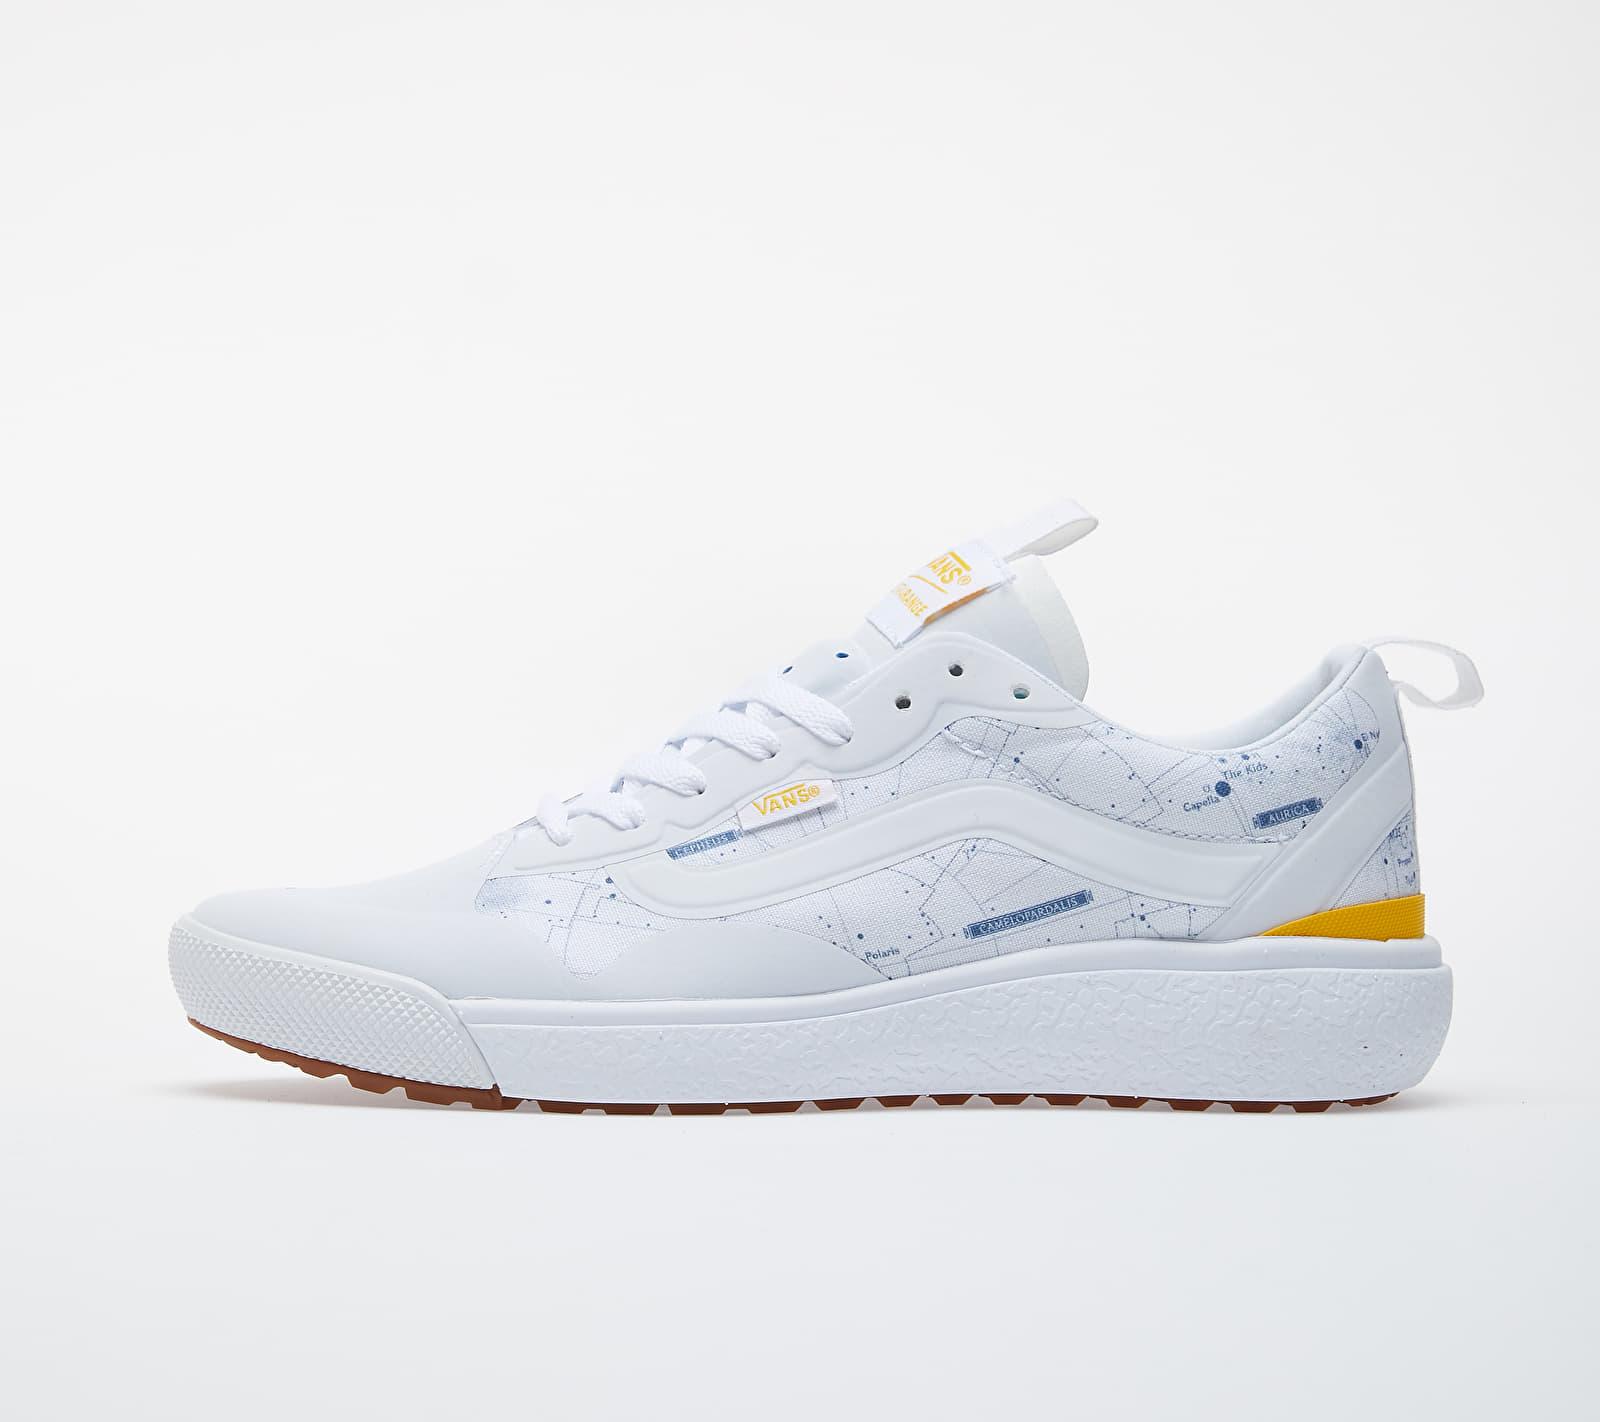 Vans X National Geographic Ultrarange Exo Shoes in White | Lyst